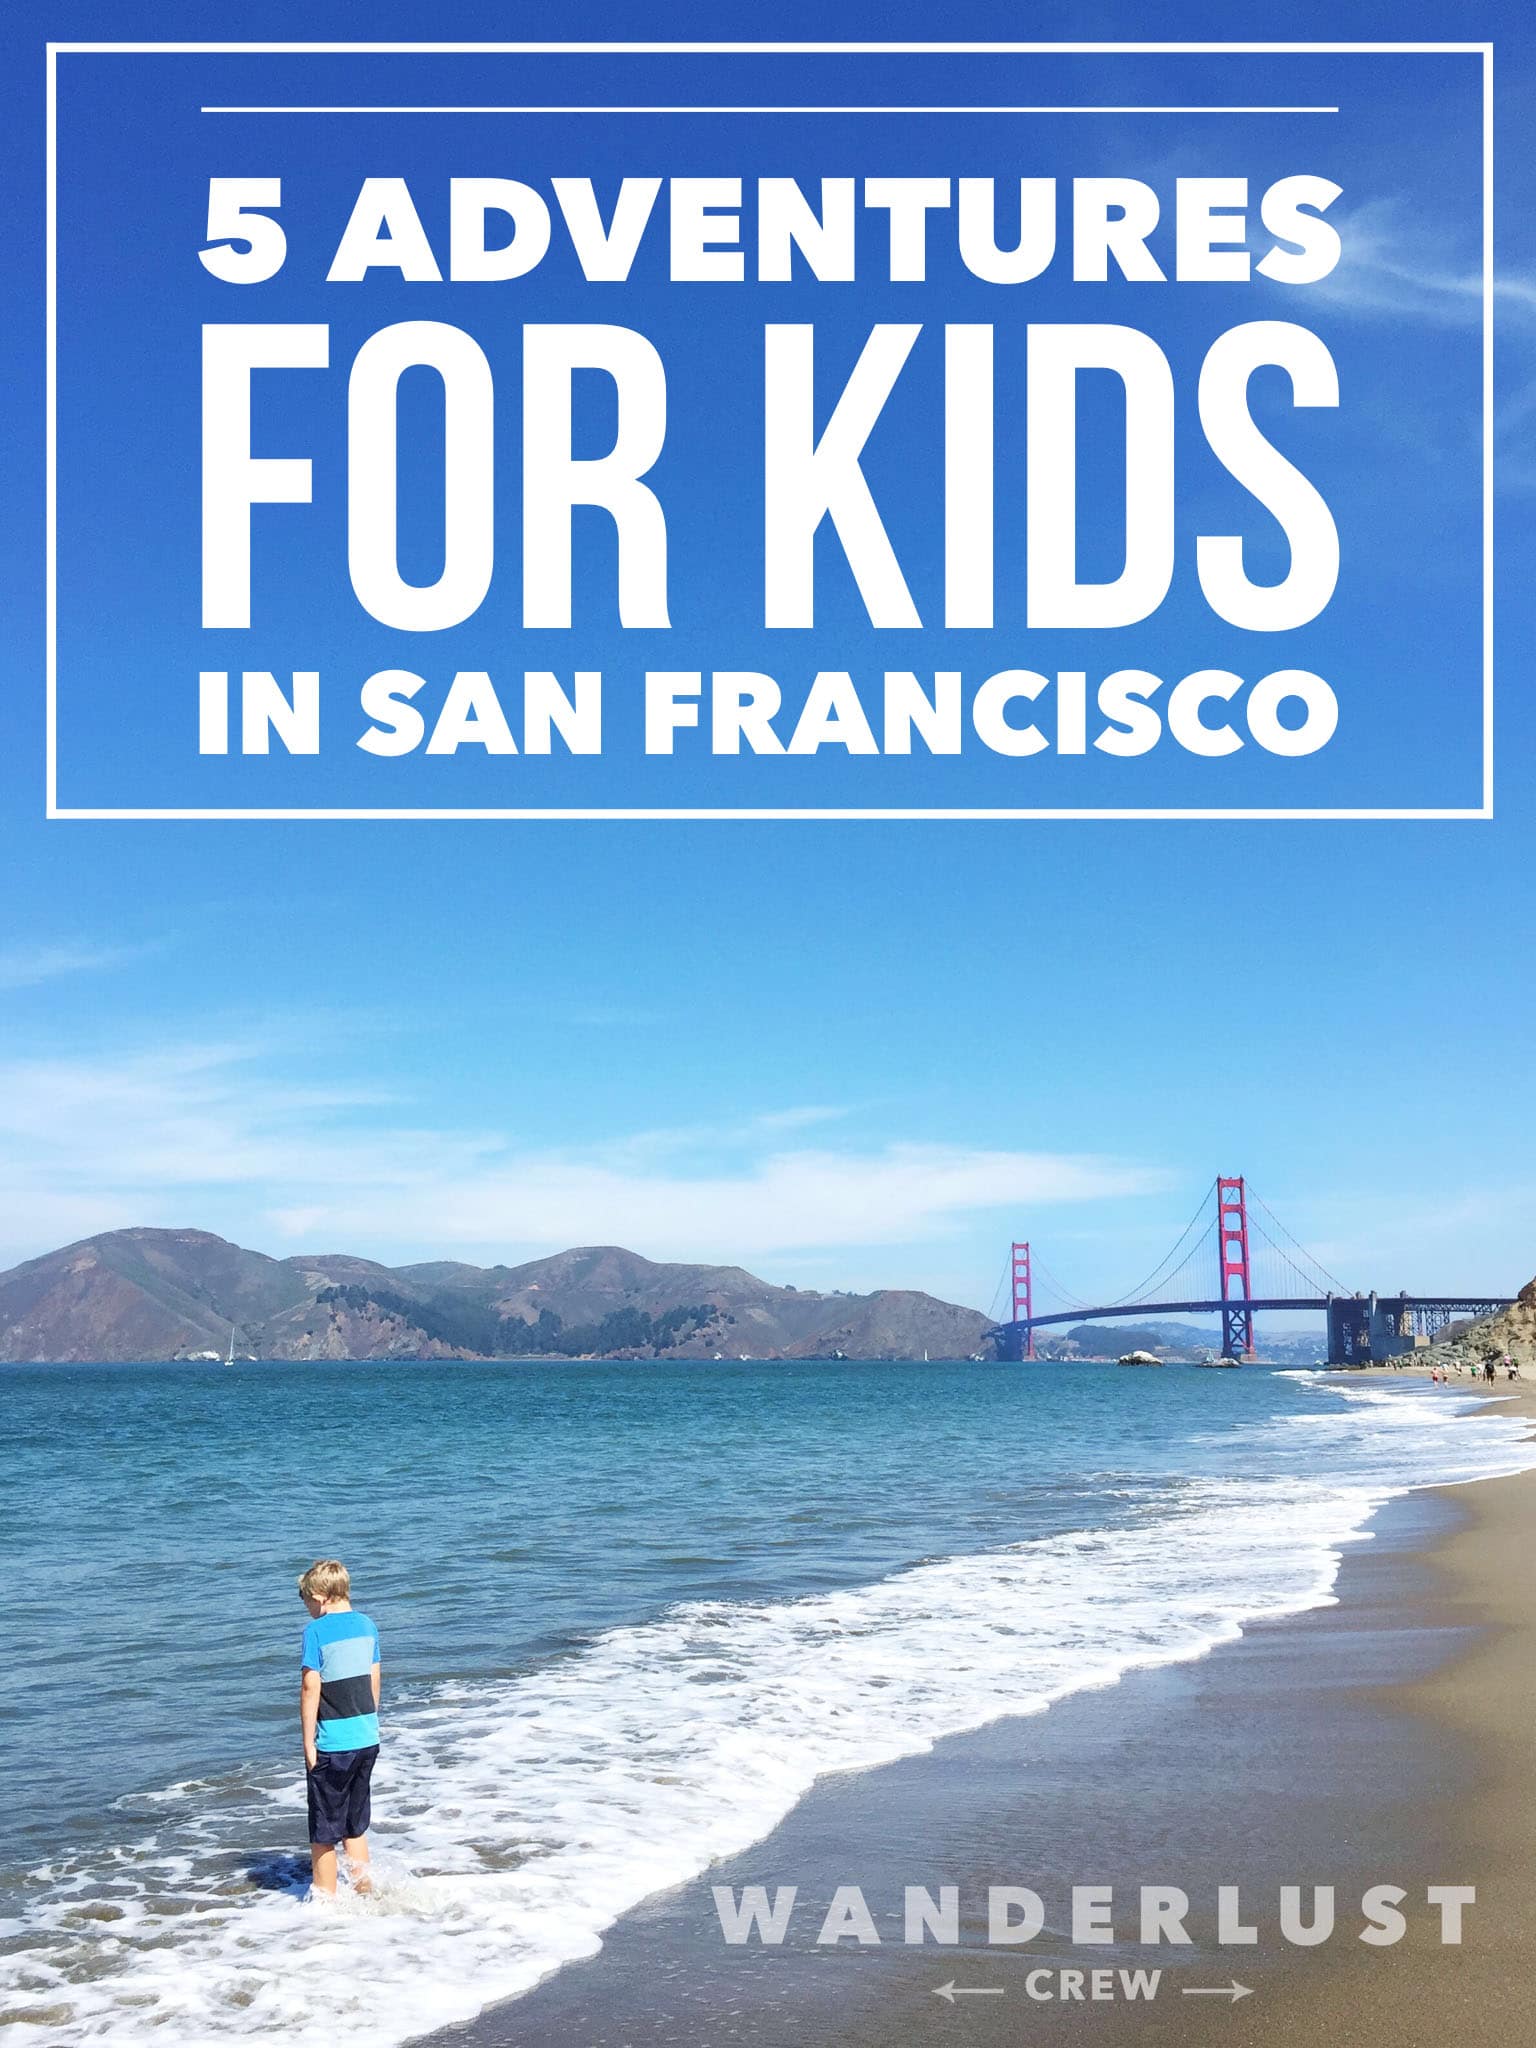 5 Adventures for Kids in San Francisco from wanderlustcrew